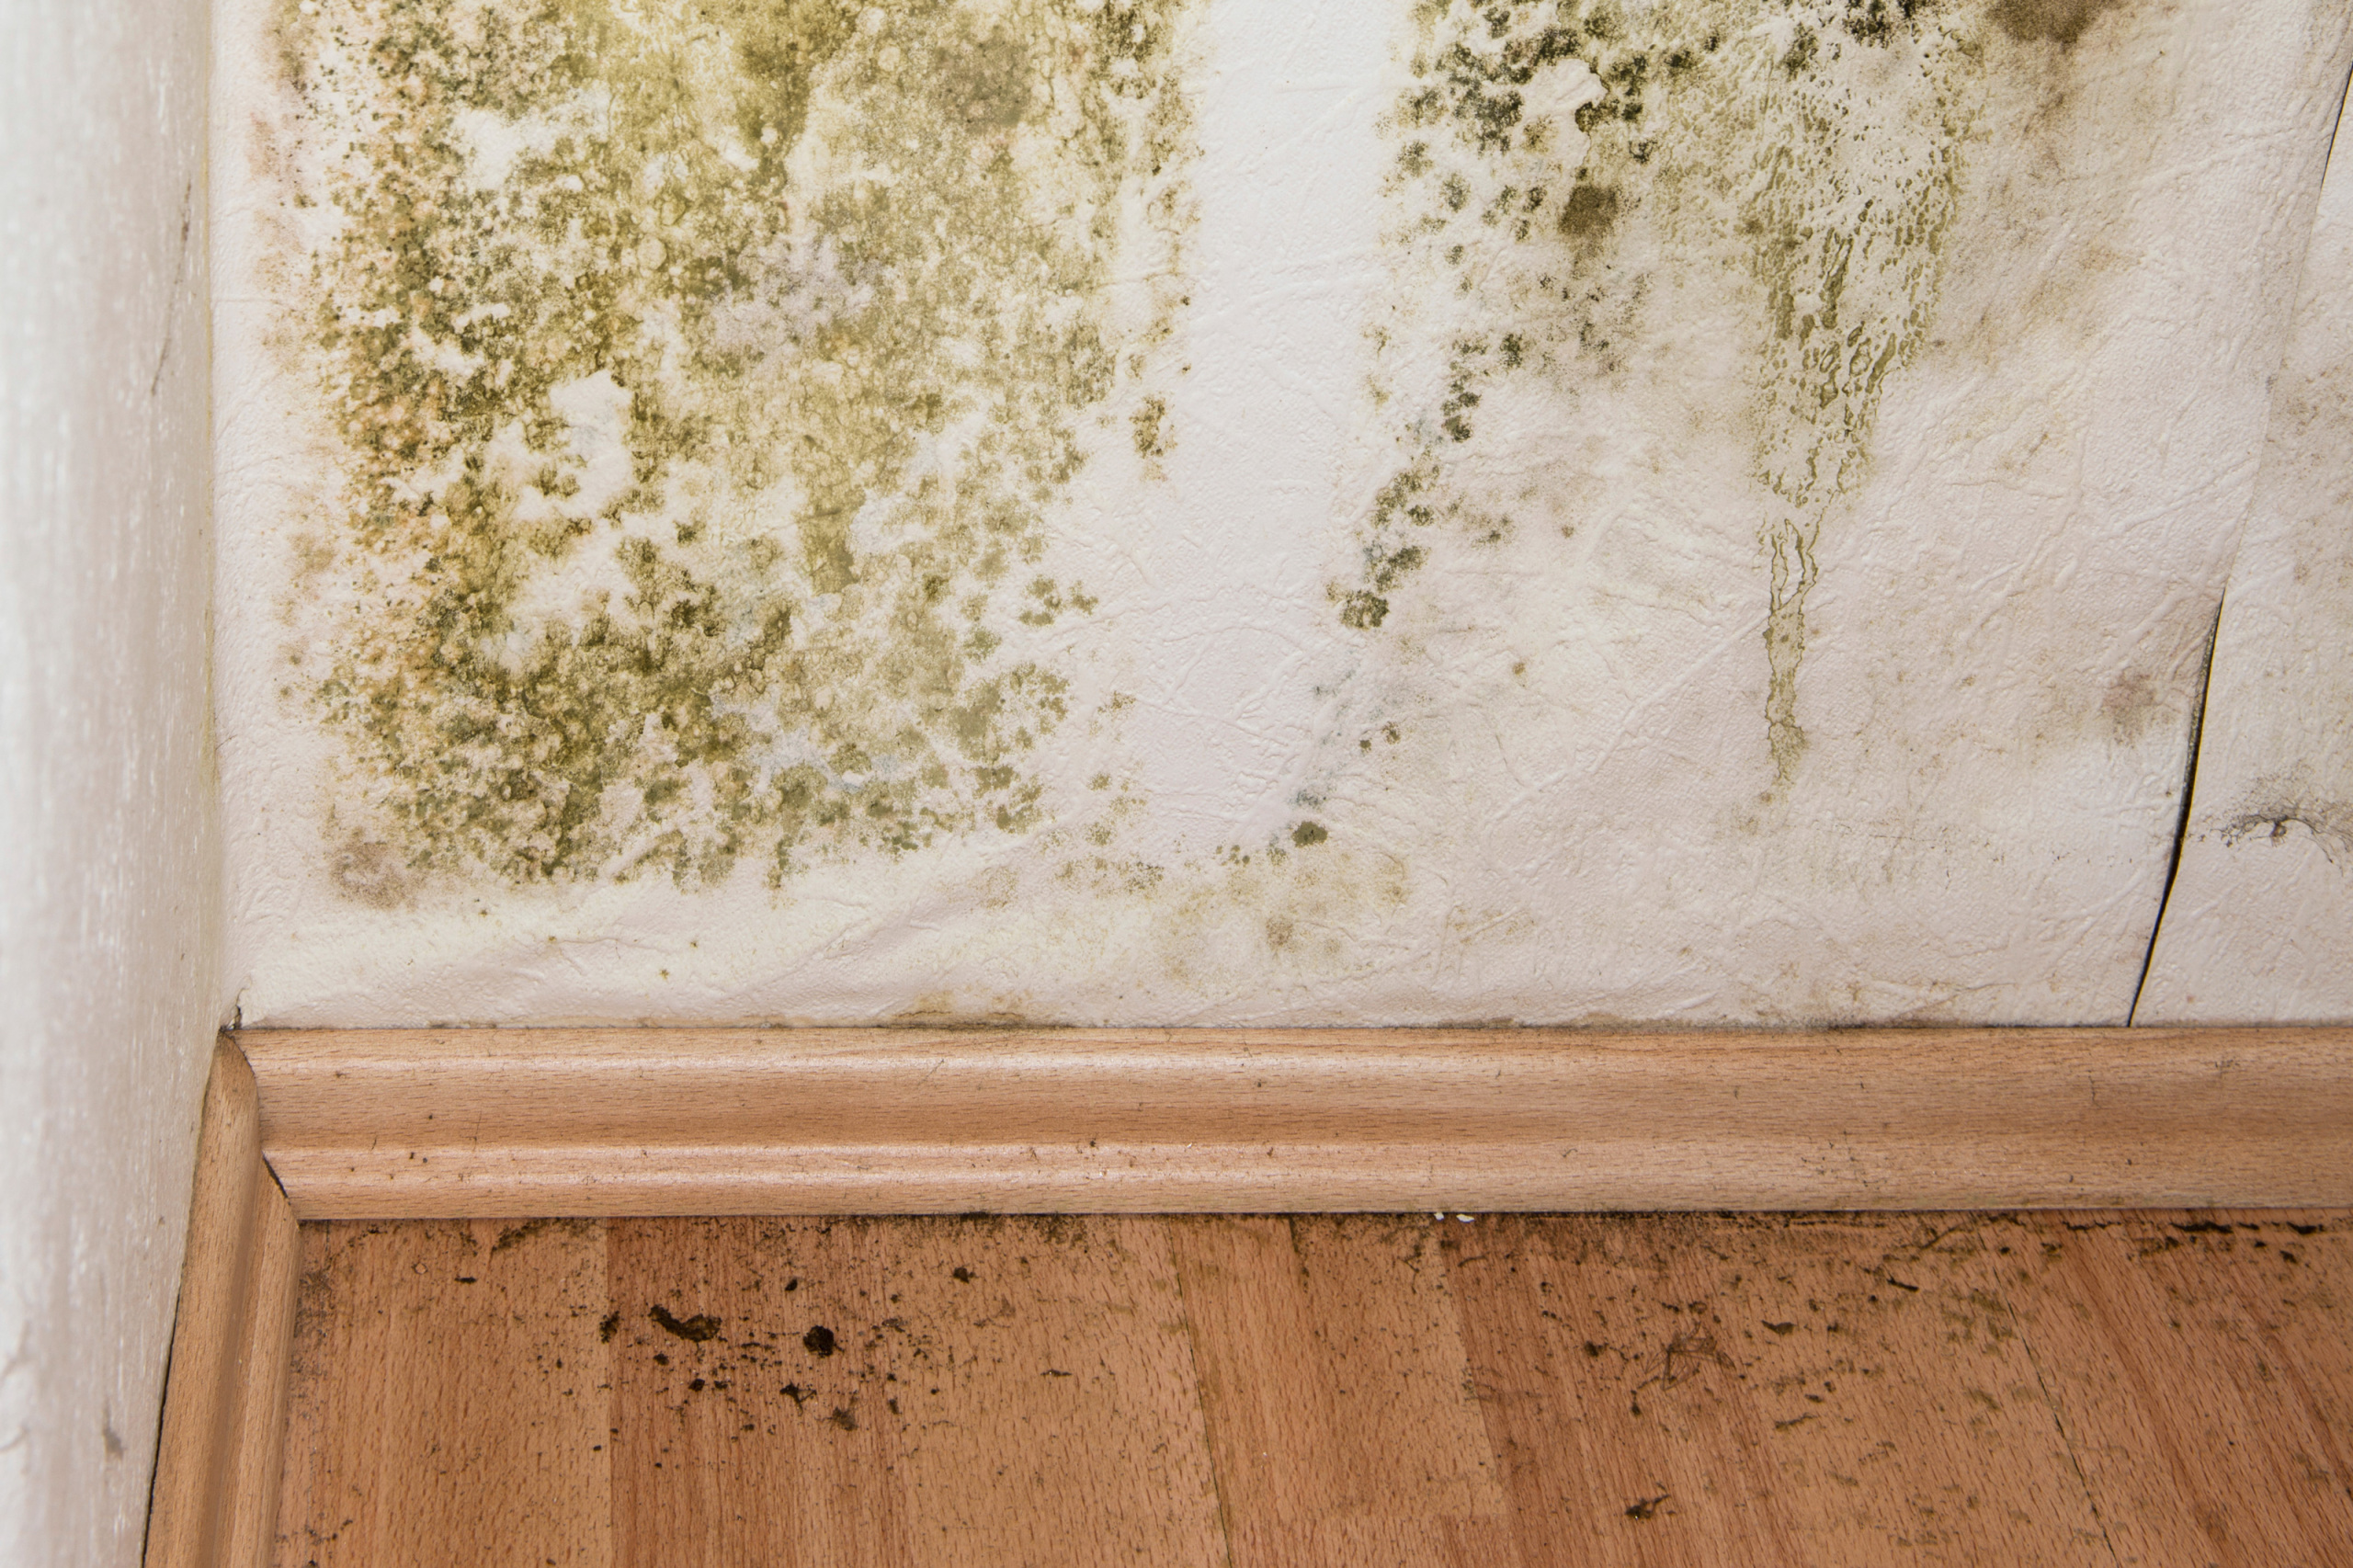 Determining Mold Infestations in your House